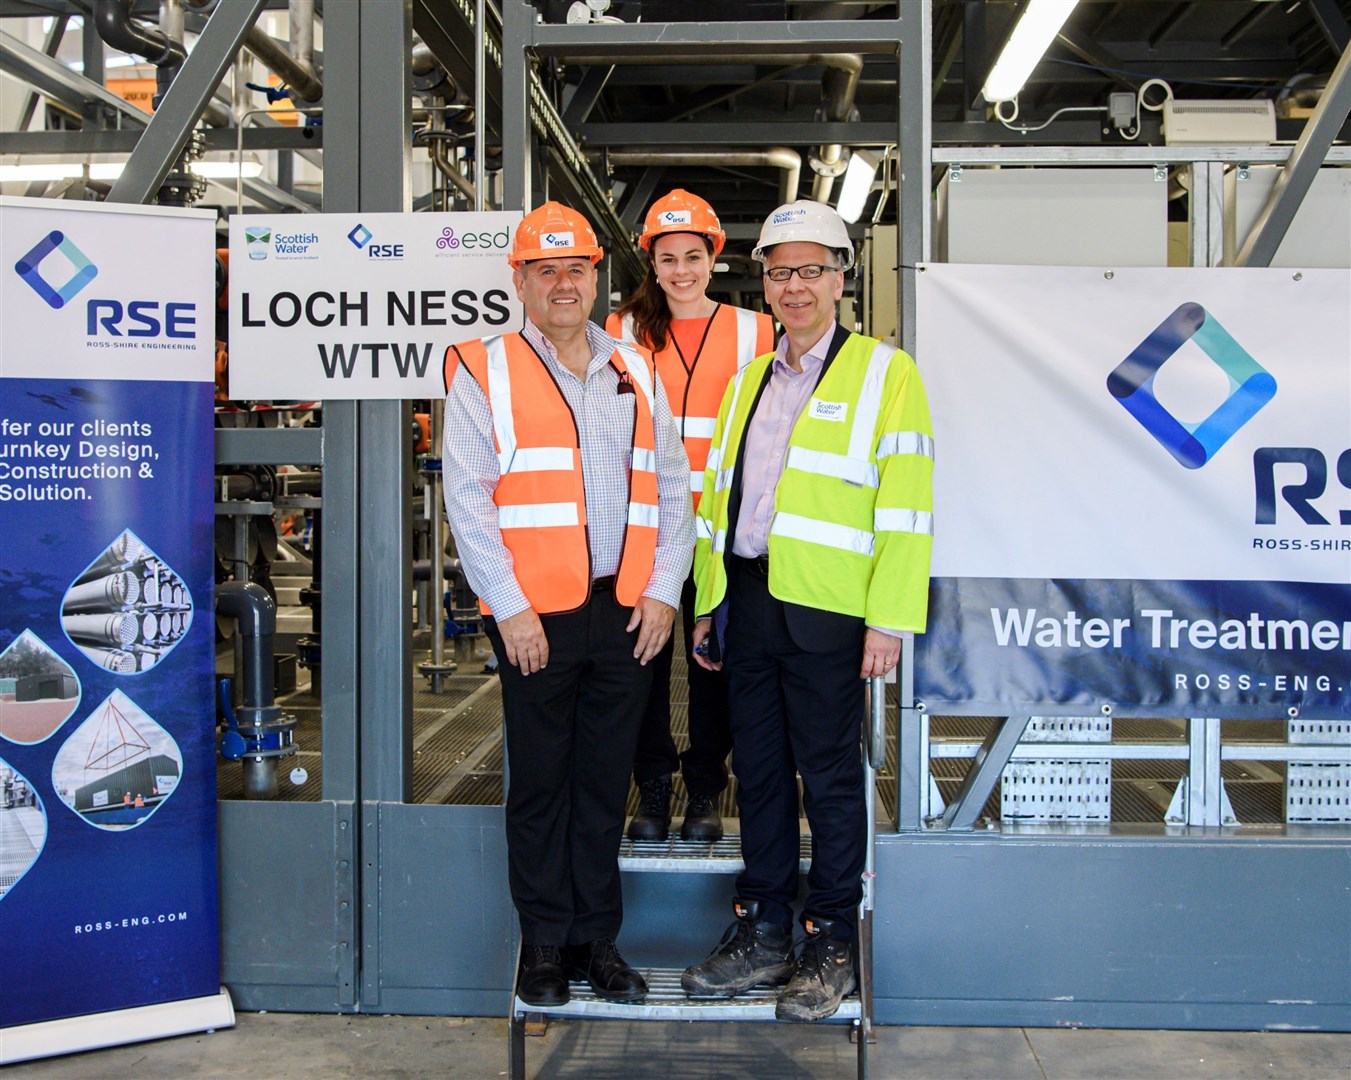 Kate Forbes MSP with RSE Managing Director Allan Dallas and Scottish Water Director of Capital Investment Mark Dickson at the entrance to the new WTW